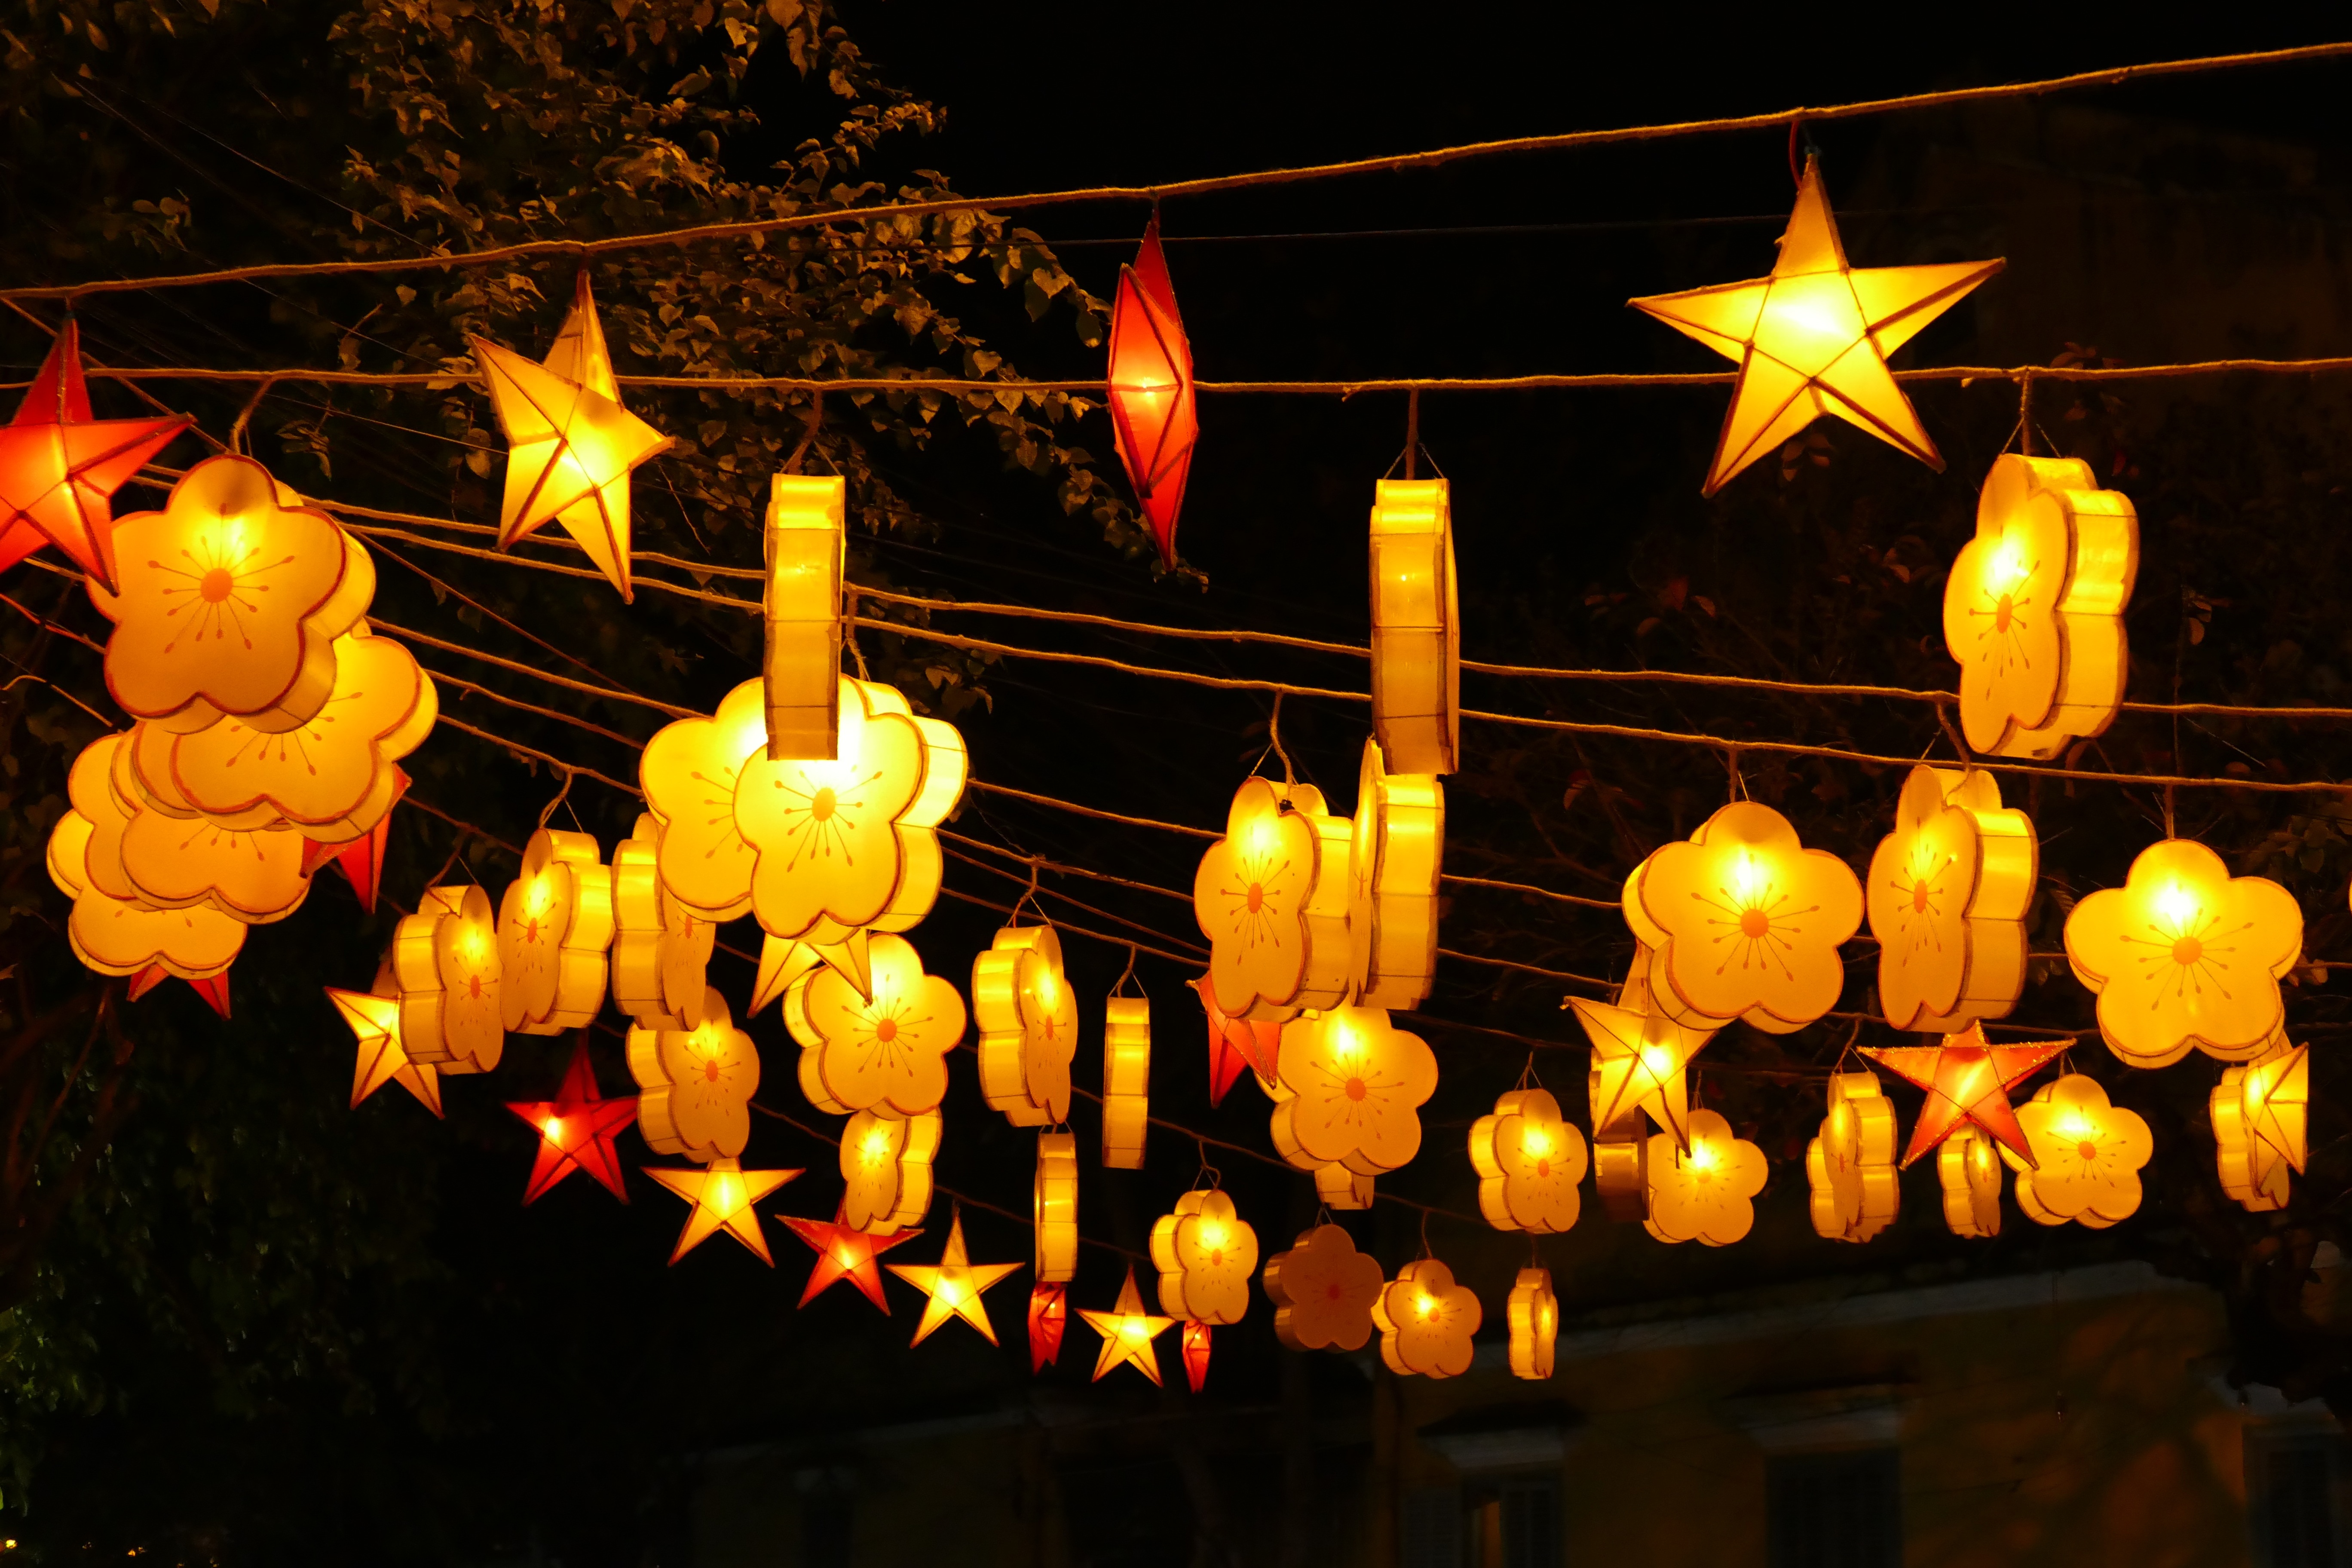 assorted yellow and red lanterns